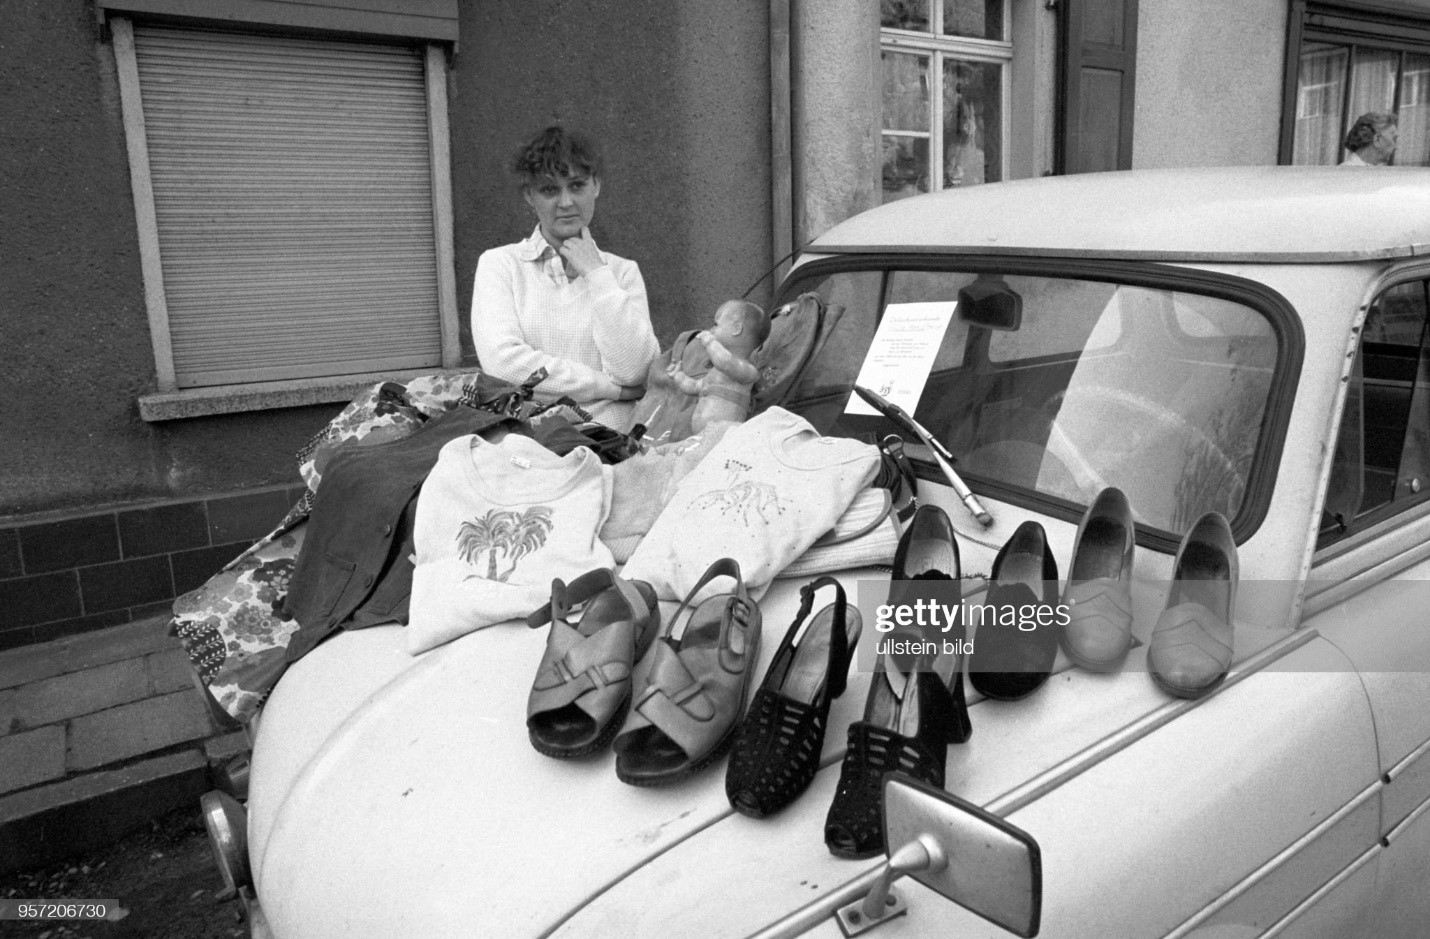 A woman offers shoes and clothing at a flea market in Gerbstedt in the copper mining region of Mansfelder Land in May 1984. The bonnet of her car serves as the sales area. 